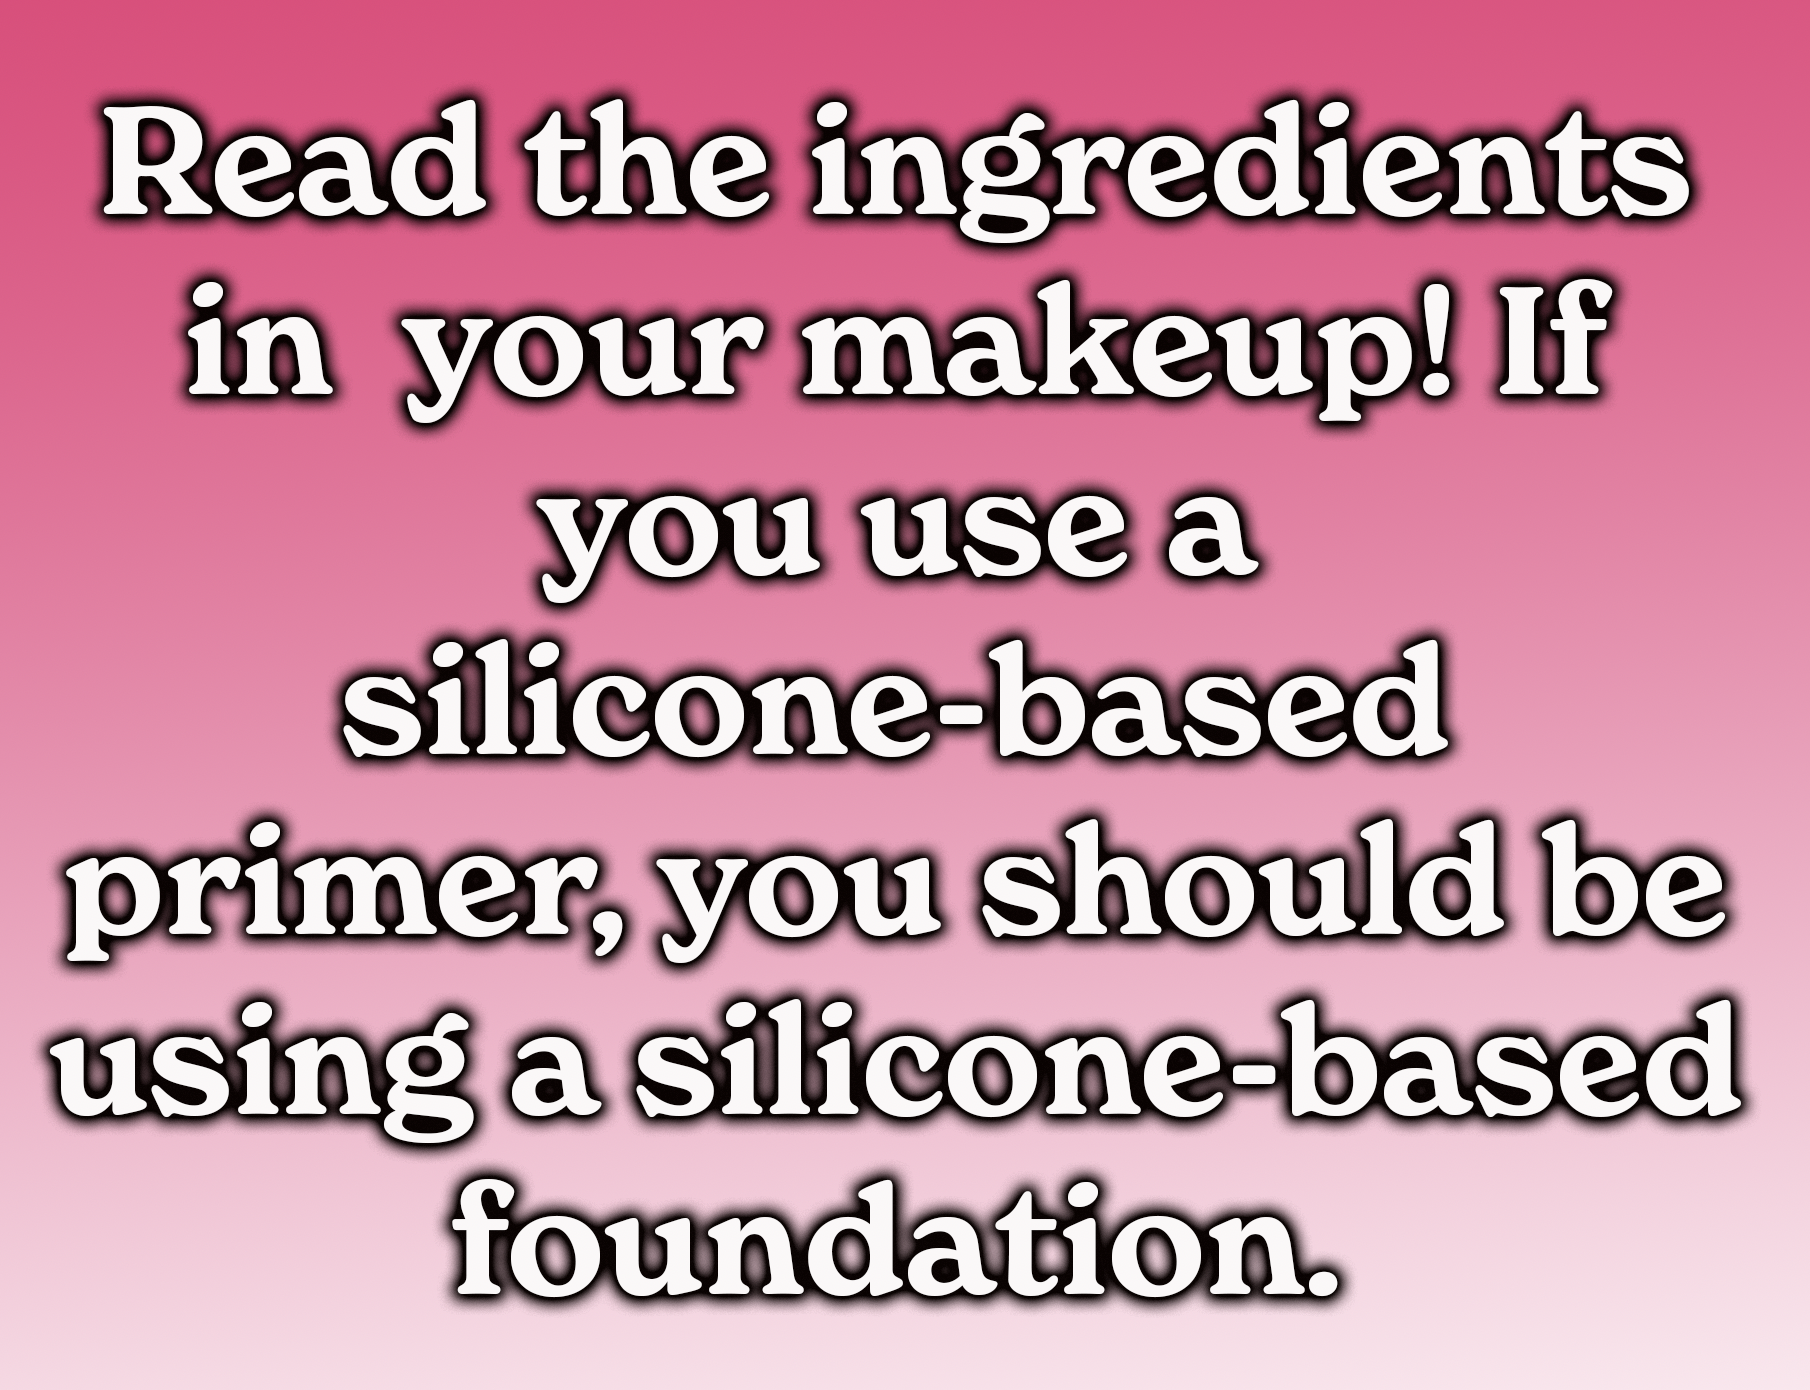 if you use a silicone-based primer, you should be using a silicone-based foundation